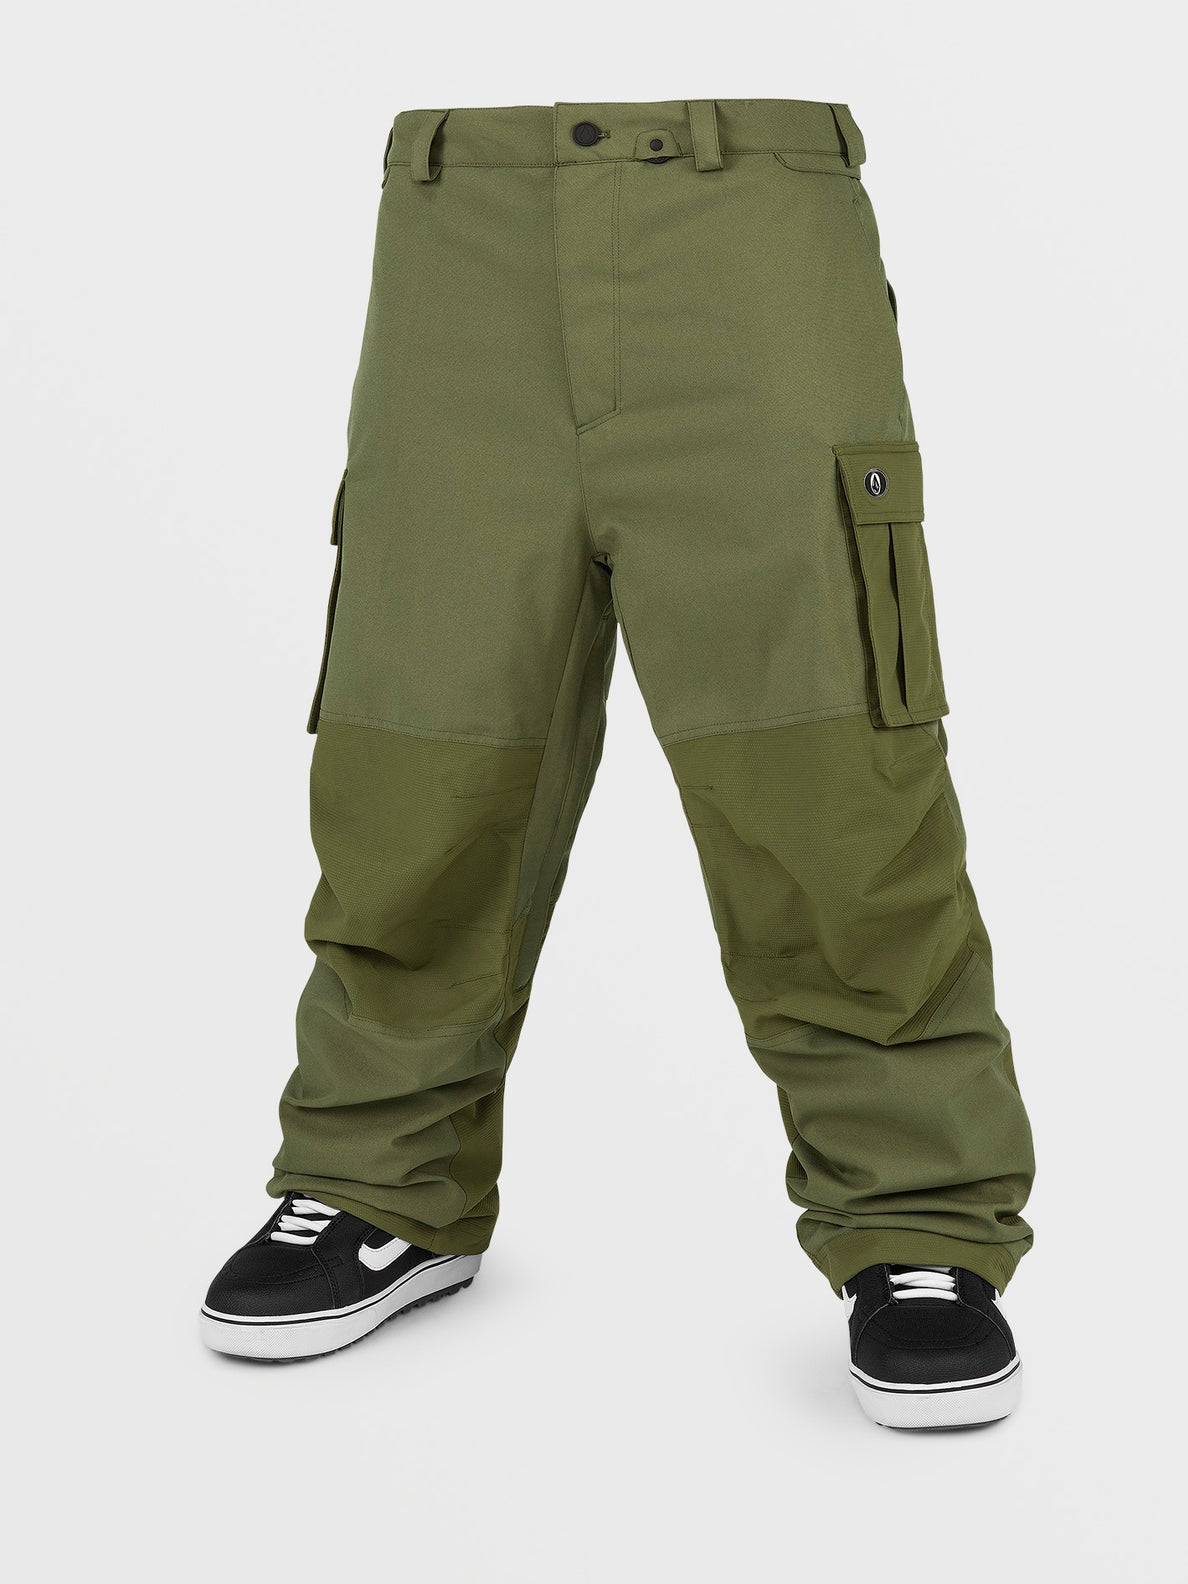 Buy Mens High Waisted Trousers | Fast UK Delivery - Insight Clothing